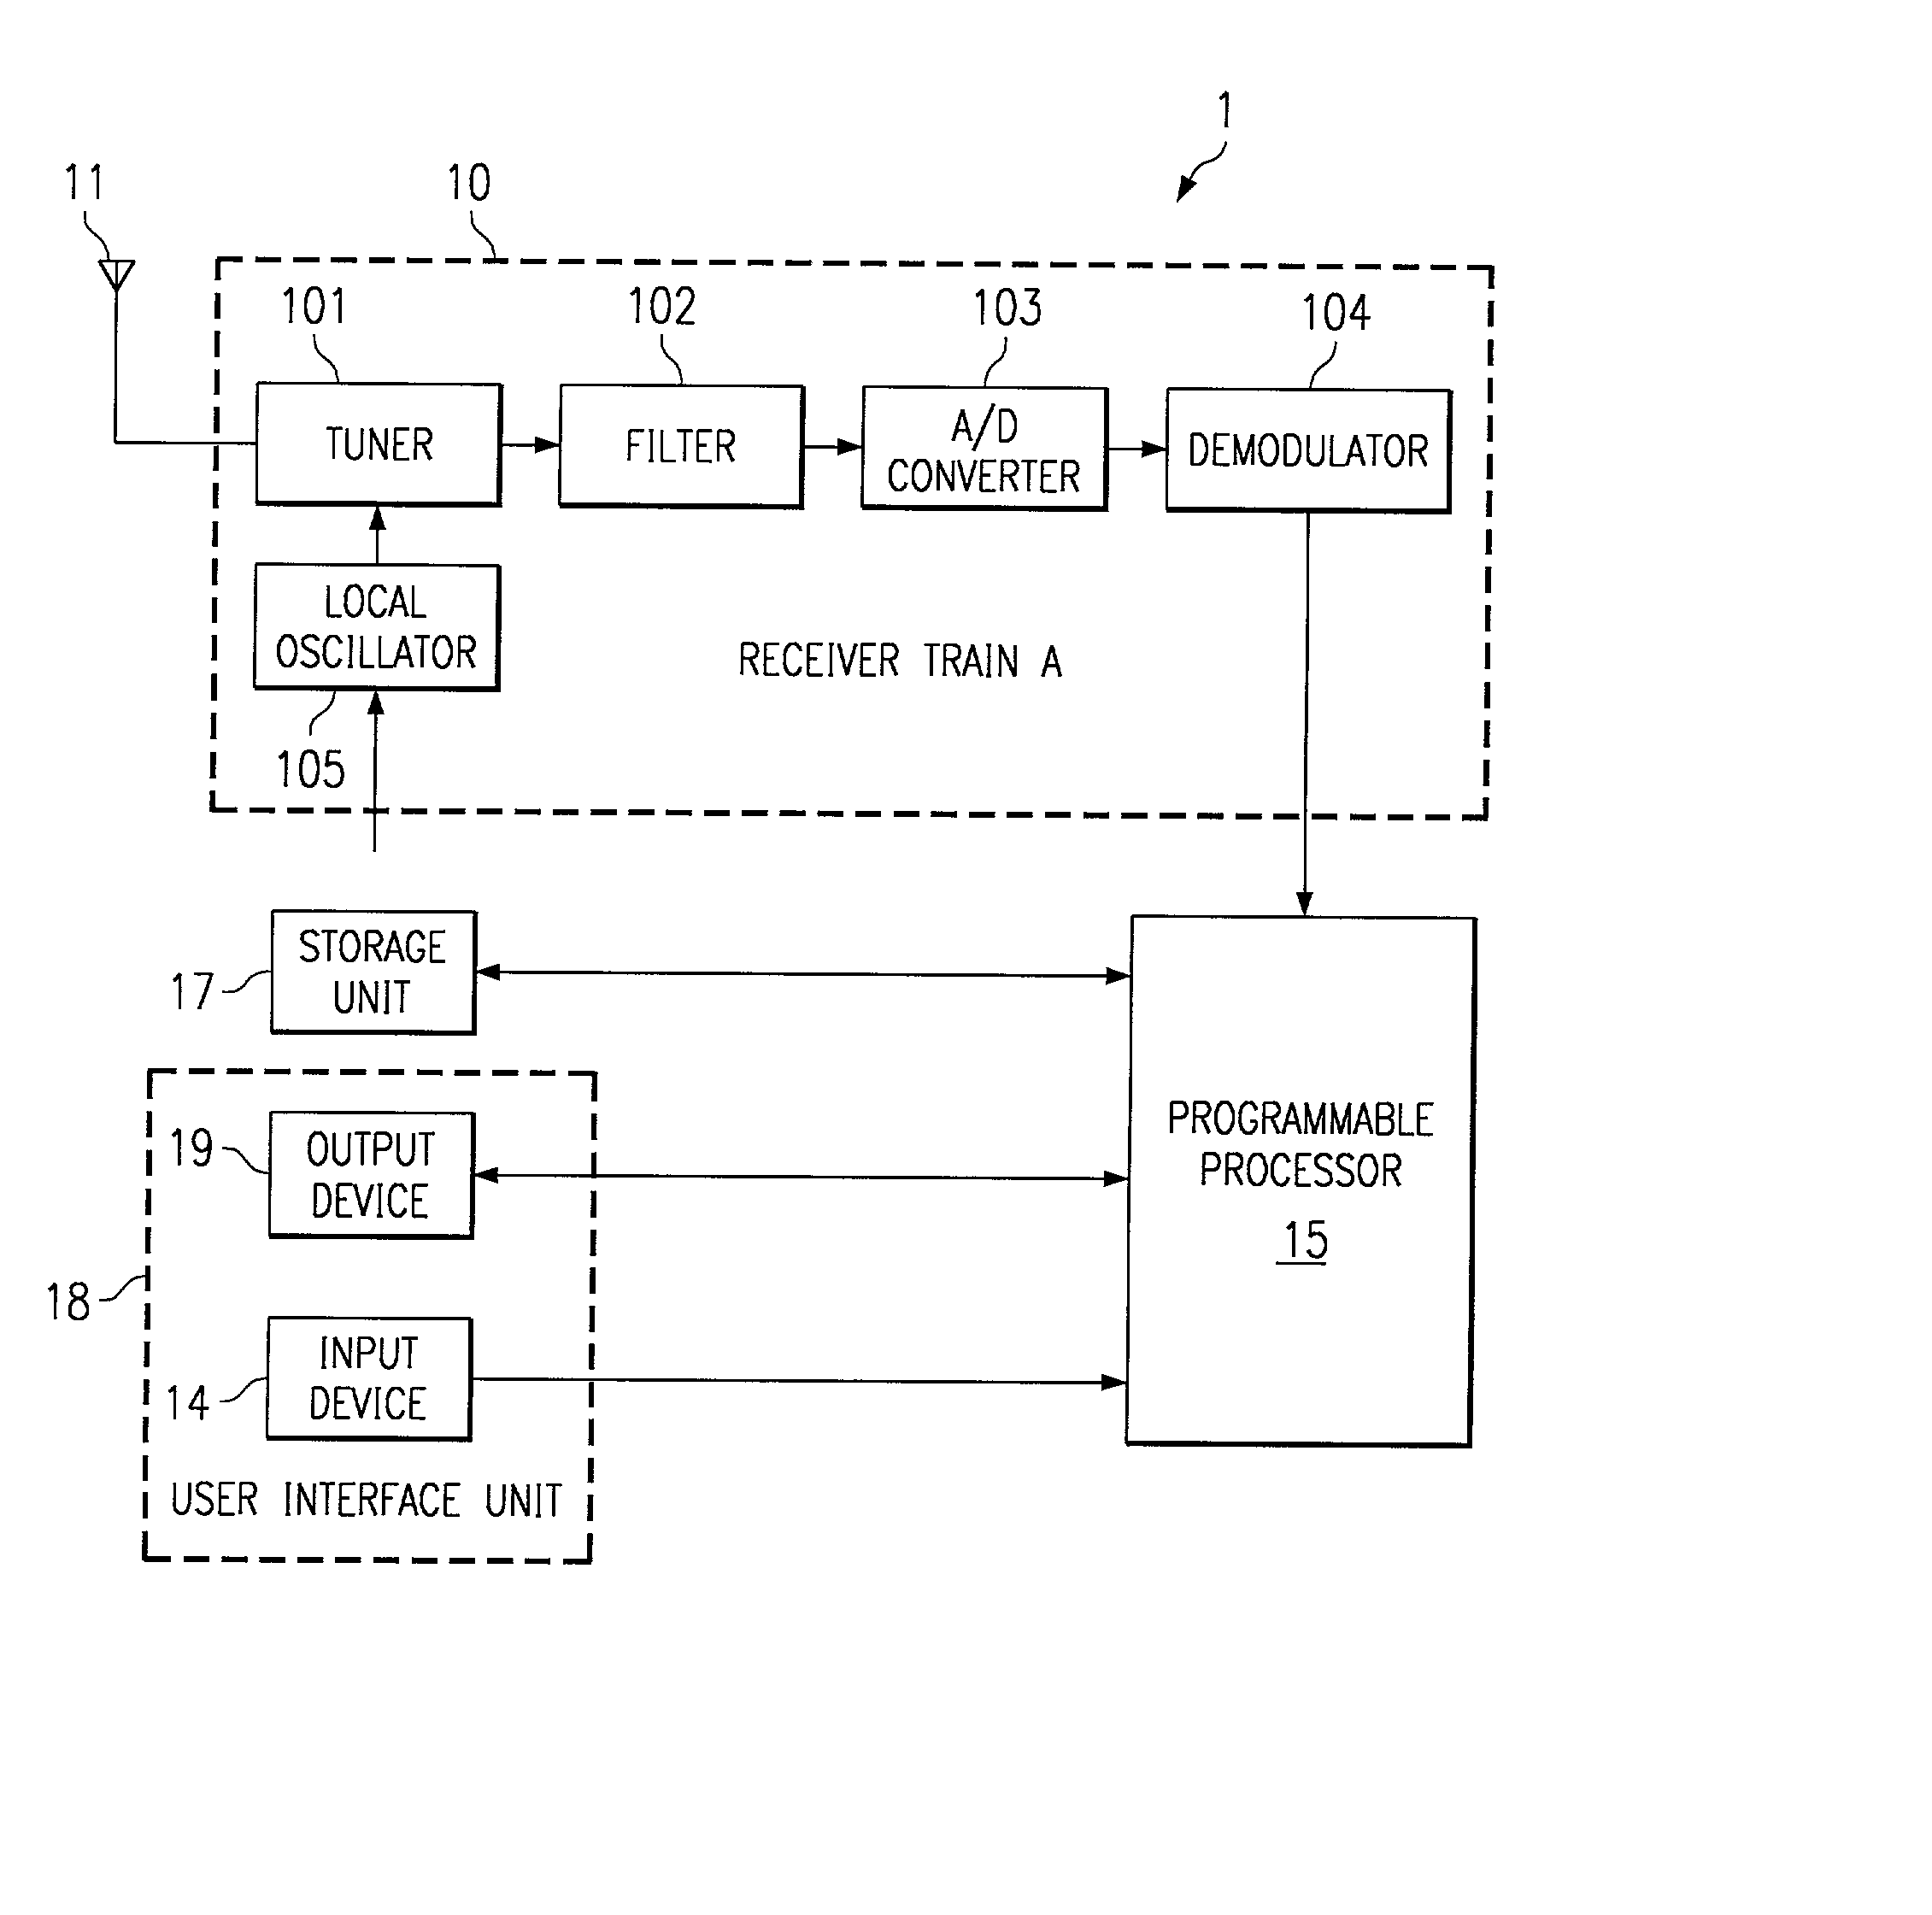 Apparatus and method for radio program guide capability in a digital radio system